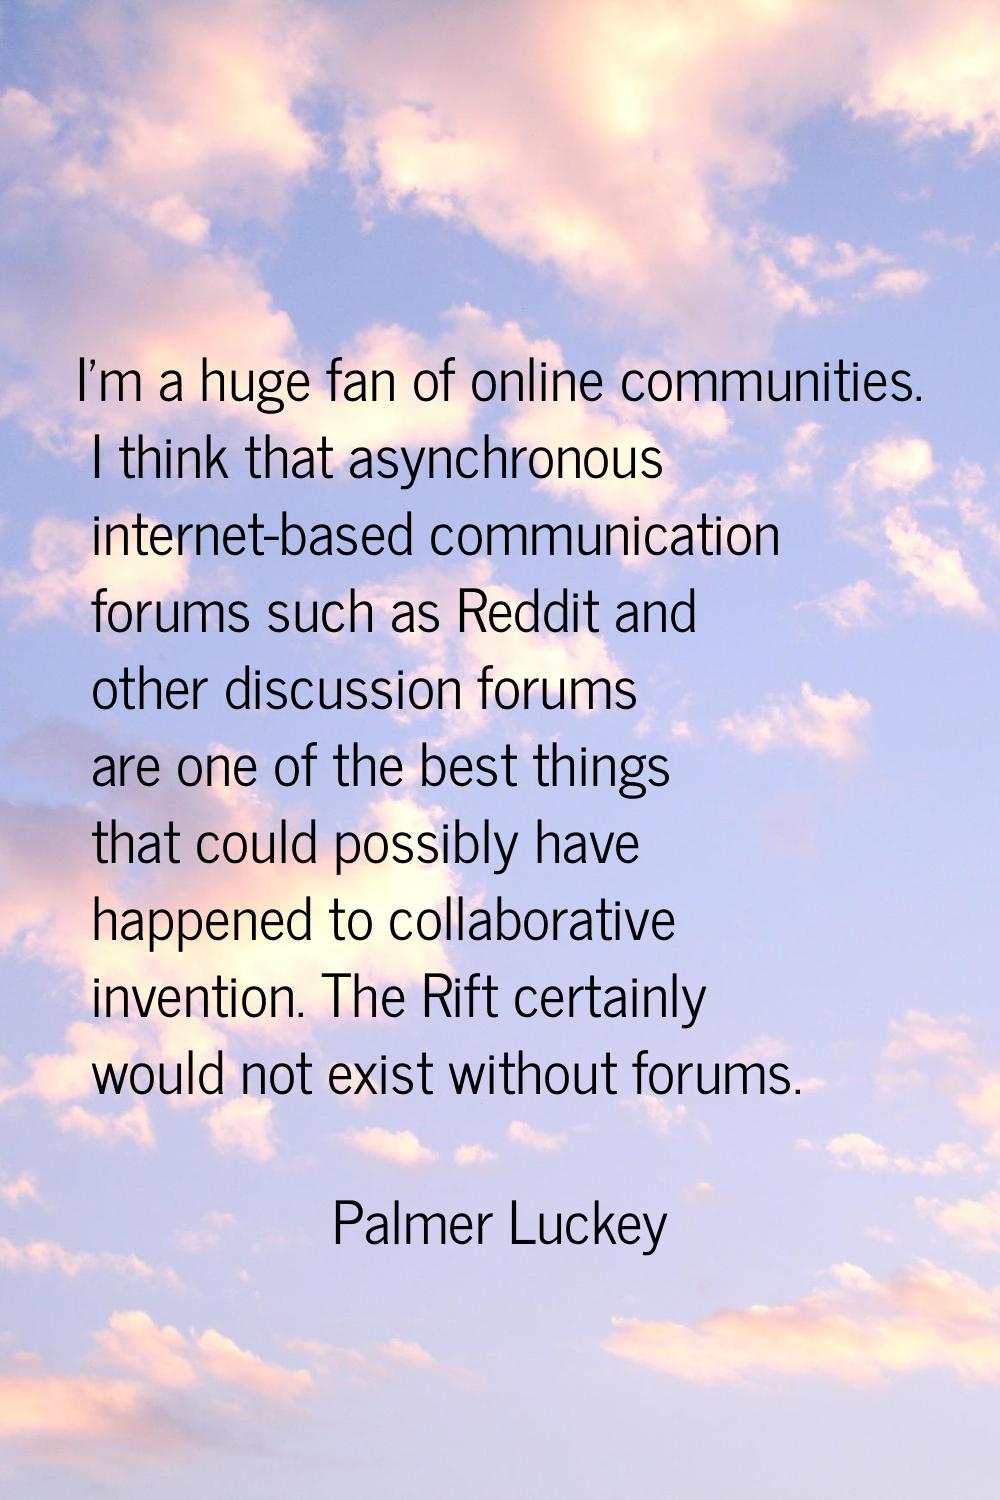 I'm a huge fan of online communities. I think that asynchronous internet-based communication forums